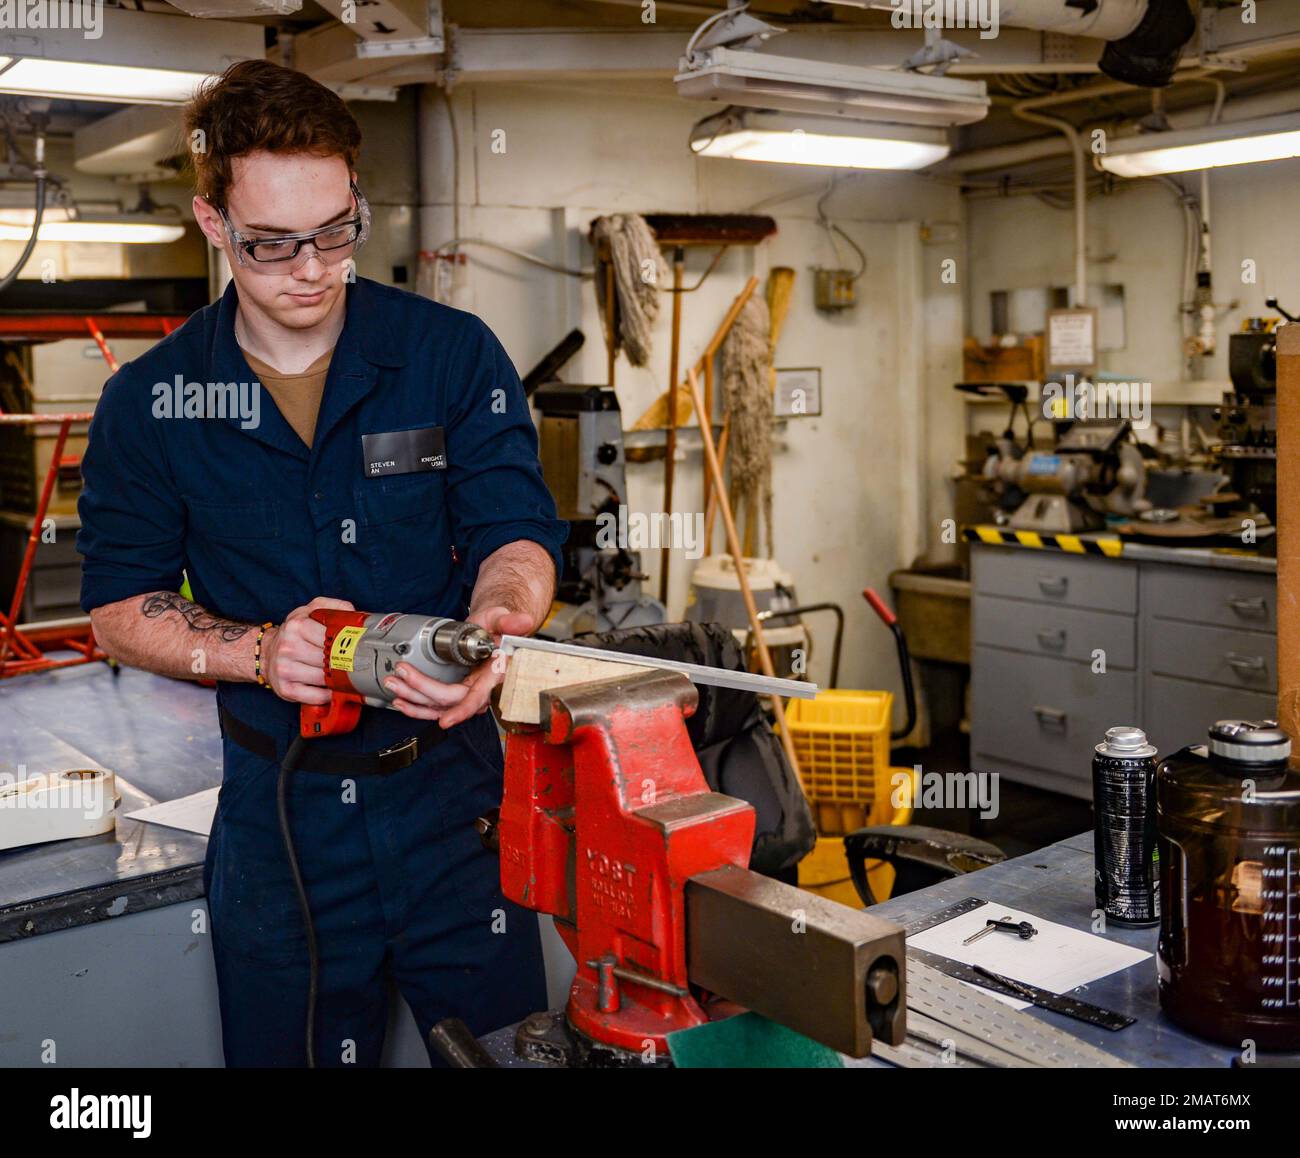 220604-N-FB730-1006 IONIAN SEA (June 4, 2022) Airman Steven Knight, from Charlotte, North Carolina, drills a hole in a hinge for a placard in the airframe shop aboard USS Harry S. Truman (CVN 75), June 4, 2022. The Harry S. Truman Carrier Strike Group is on a scheduled deployment in the U.S. Naval Forces Europe area of operations, employed by U.S. Sixth Fleet to defend U.S., Allied and Partner interests. Stock Photo